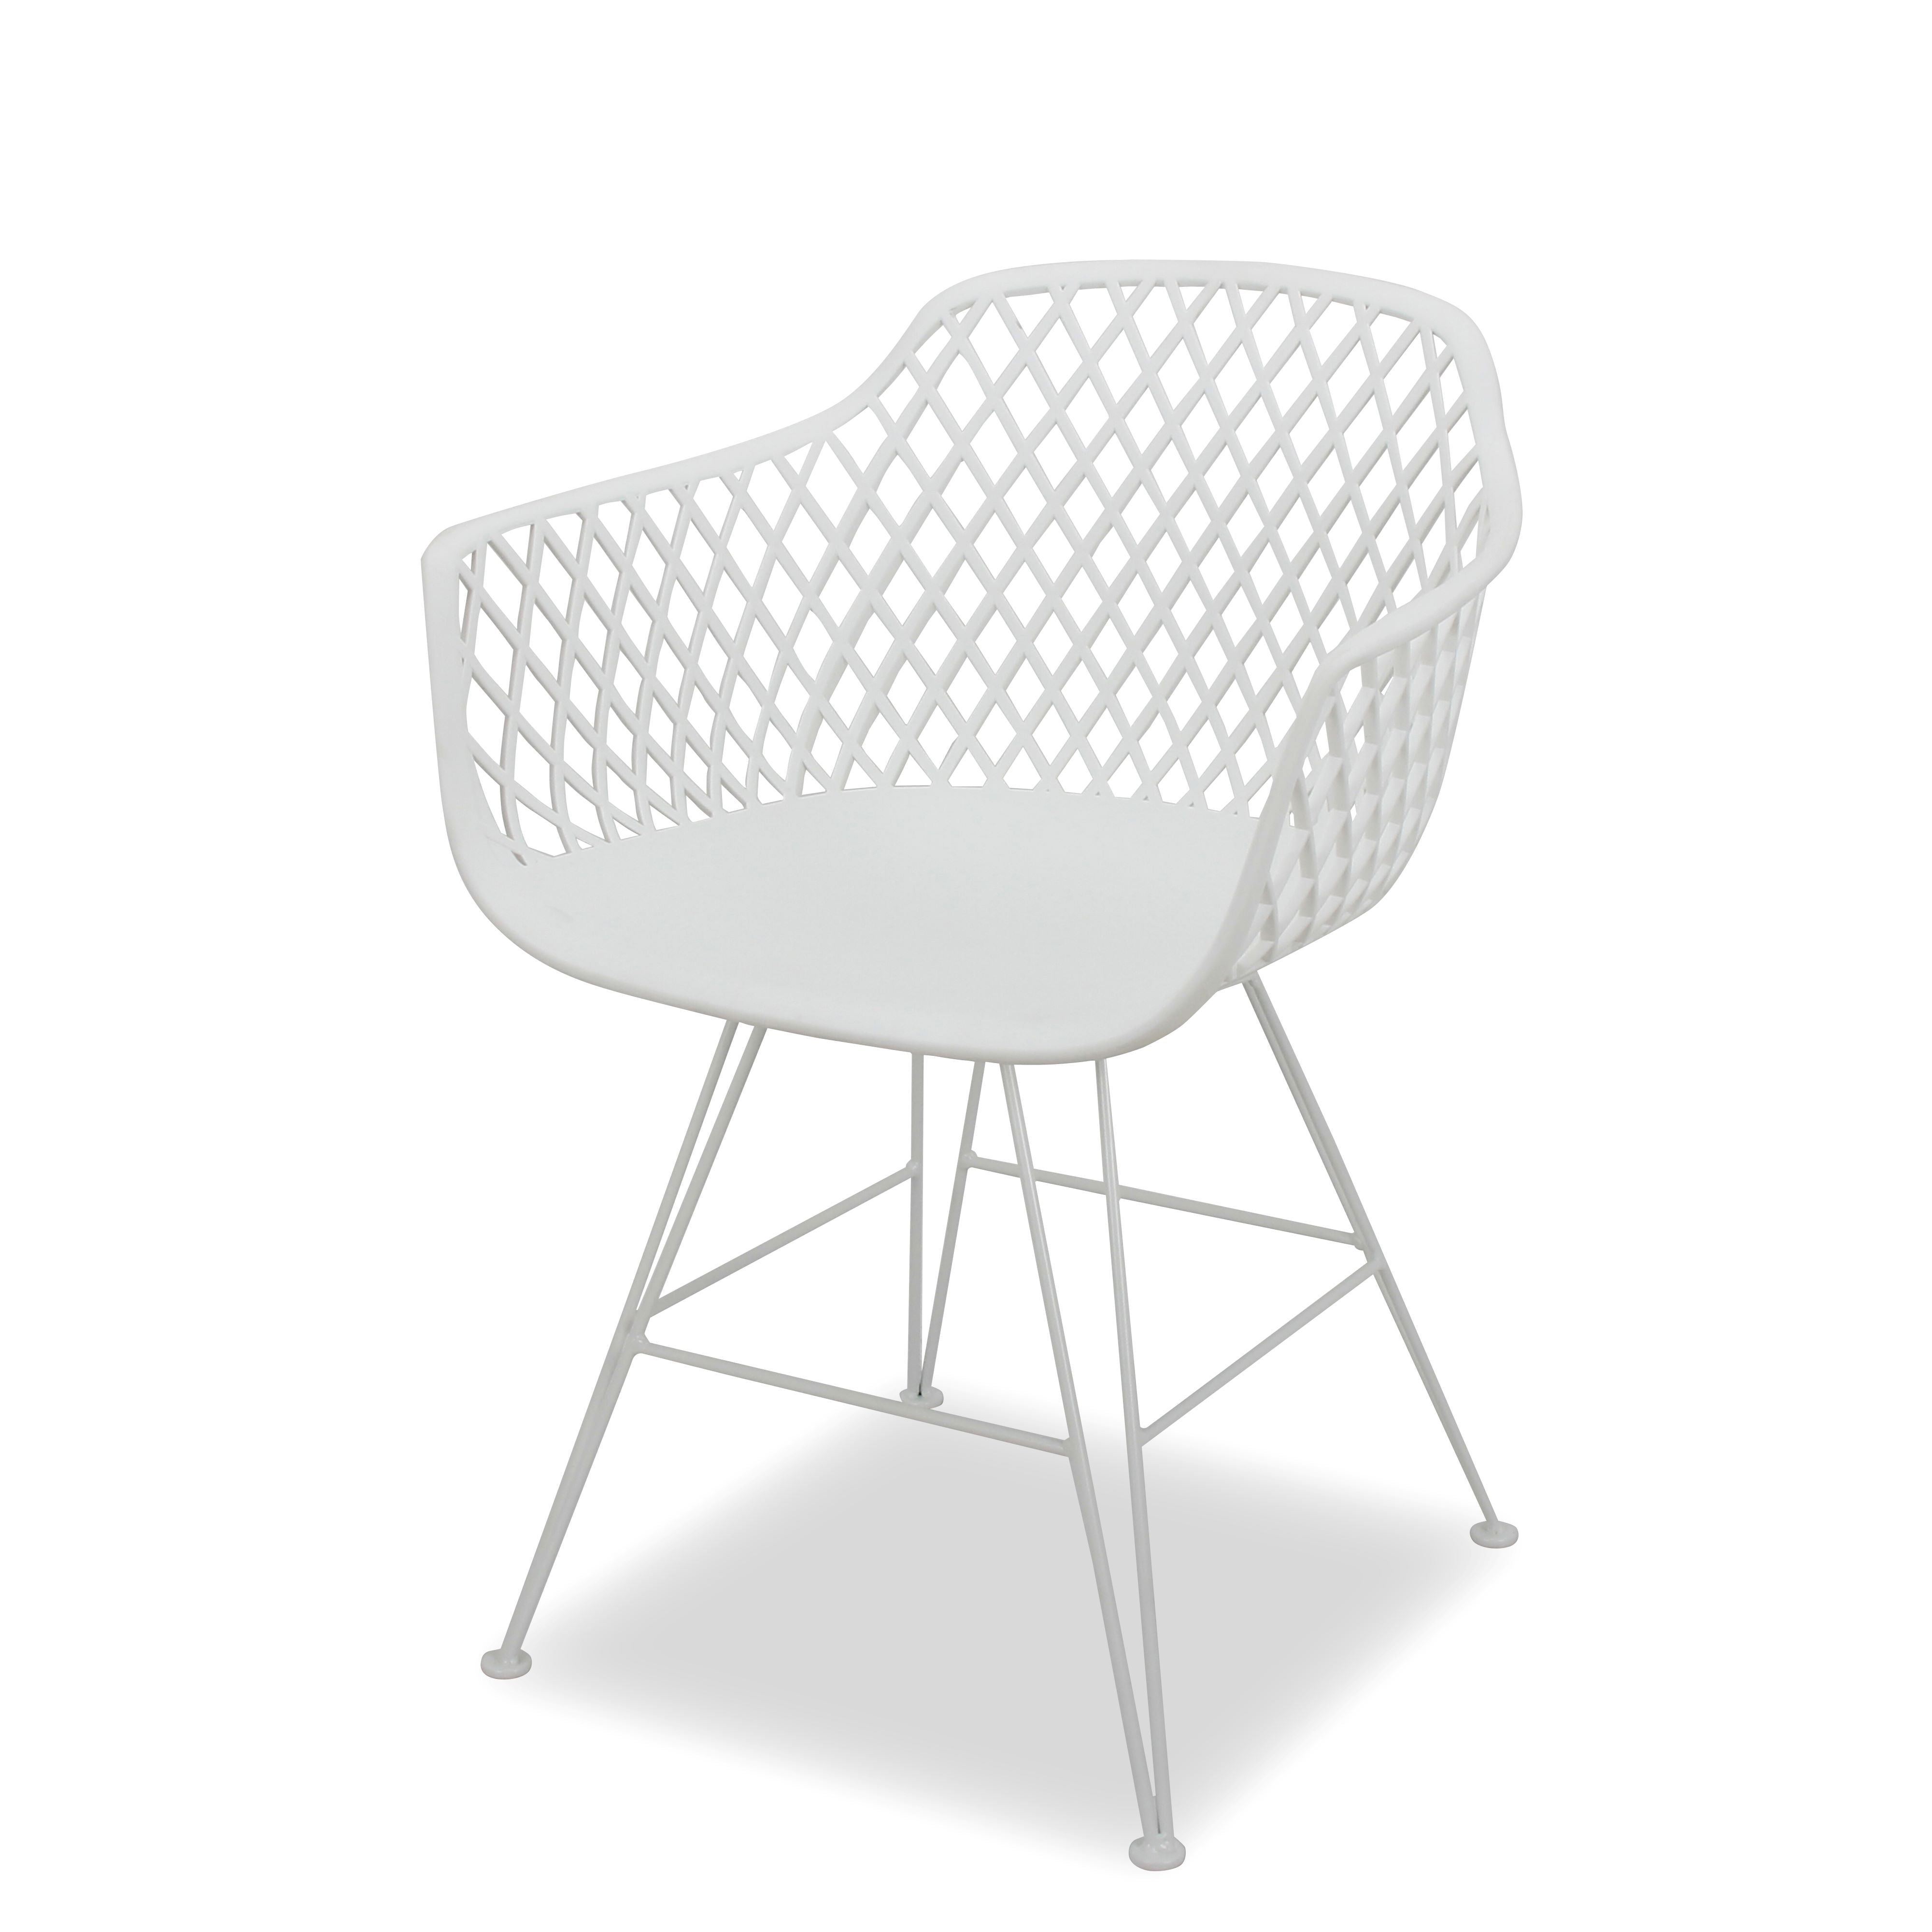 Marley Outdoor Dining Chair - White